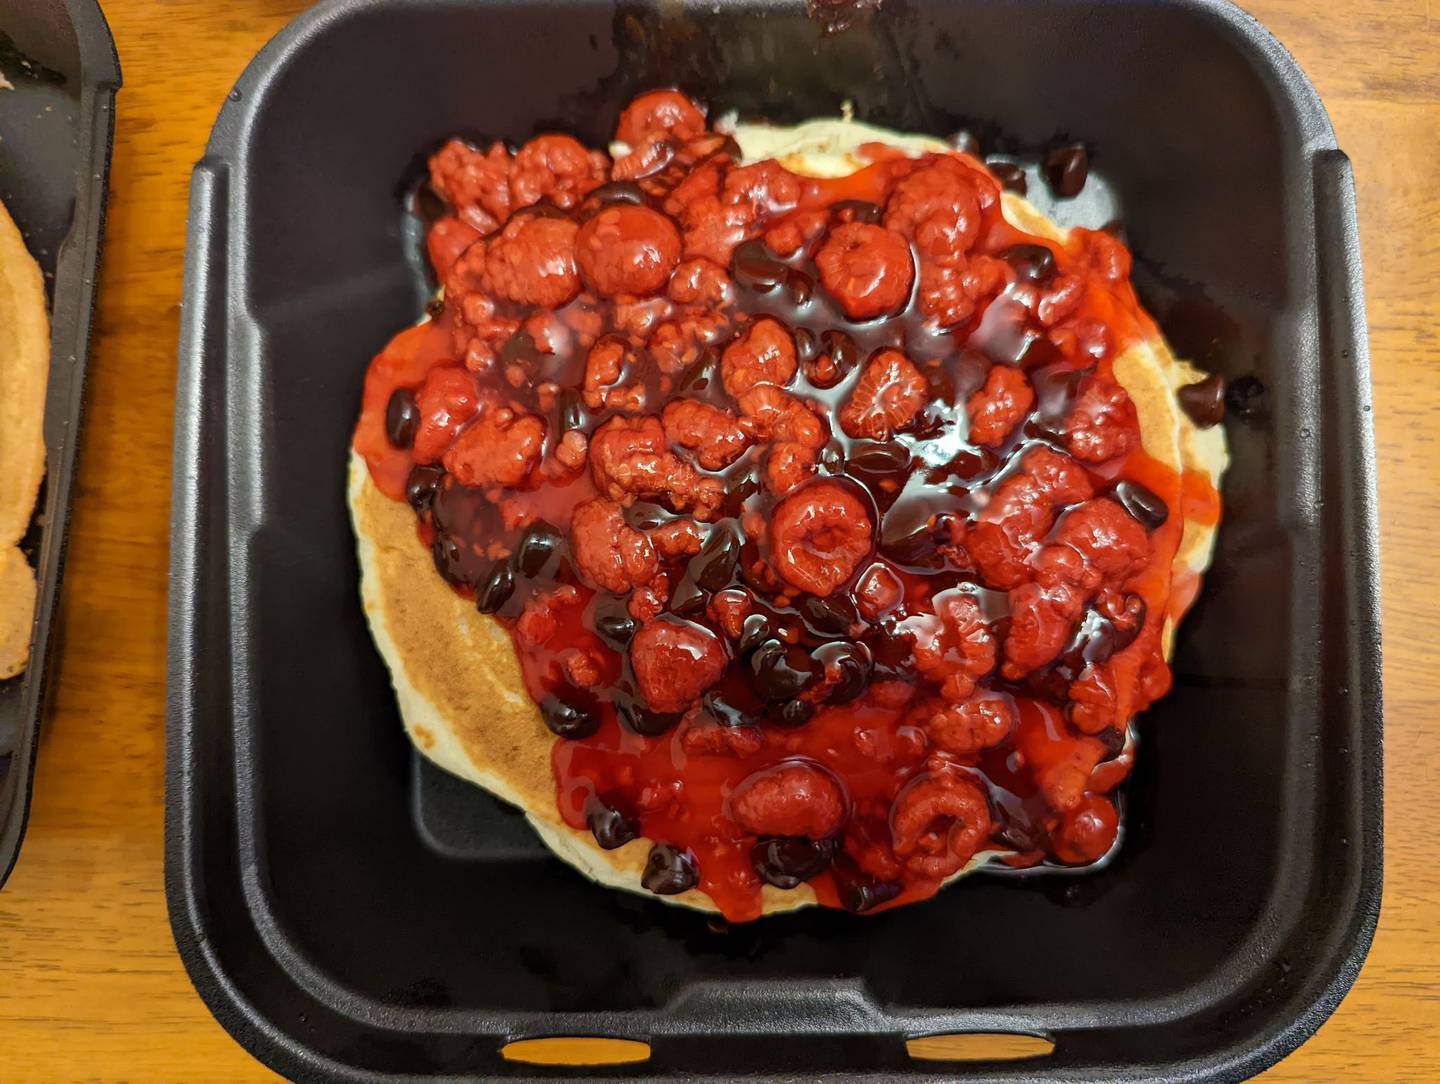 Happy Place Cafe in Shorewood features these raspberry-chocolate chip pancakes for $9.75.